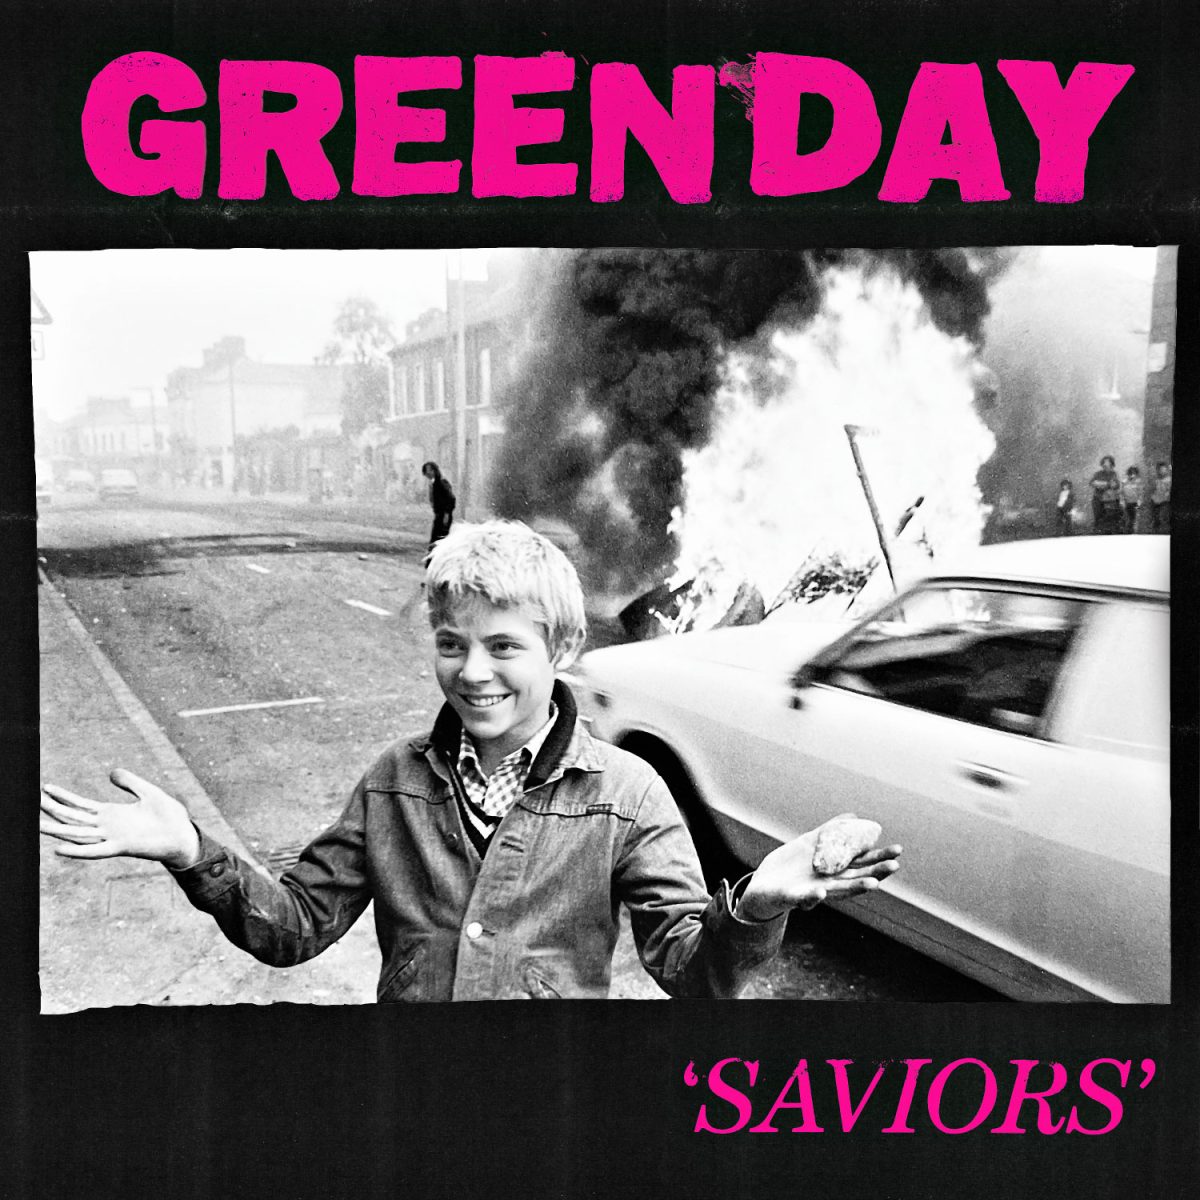 Green Days new album Saviors lacks depth to reach the level of the bands epic history.